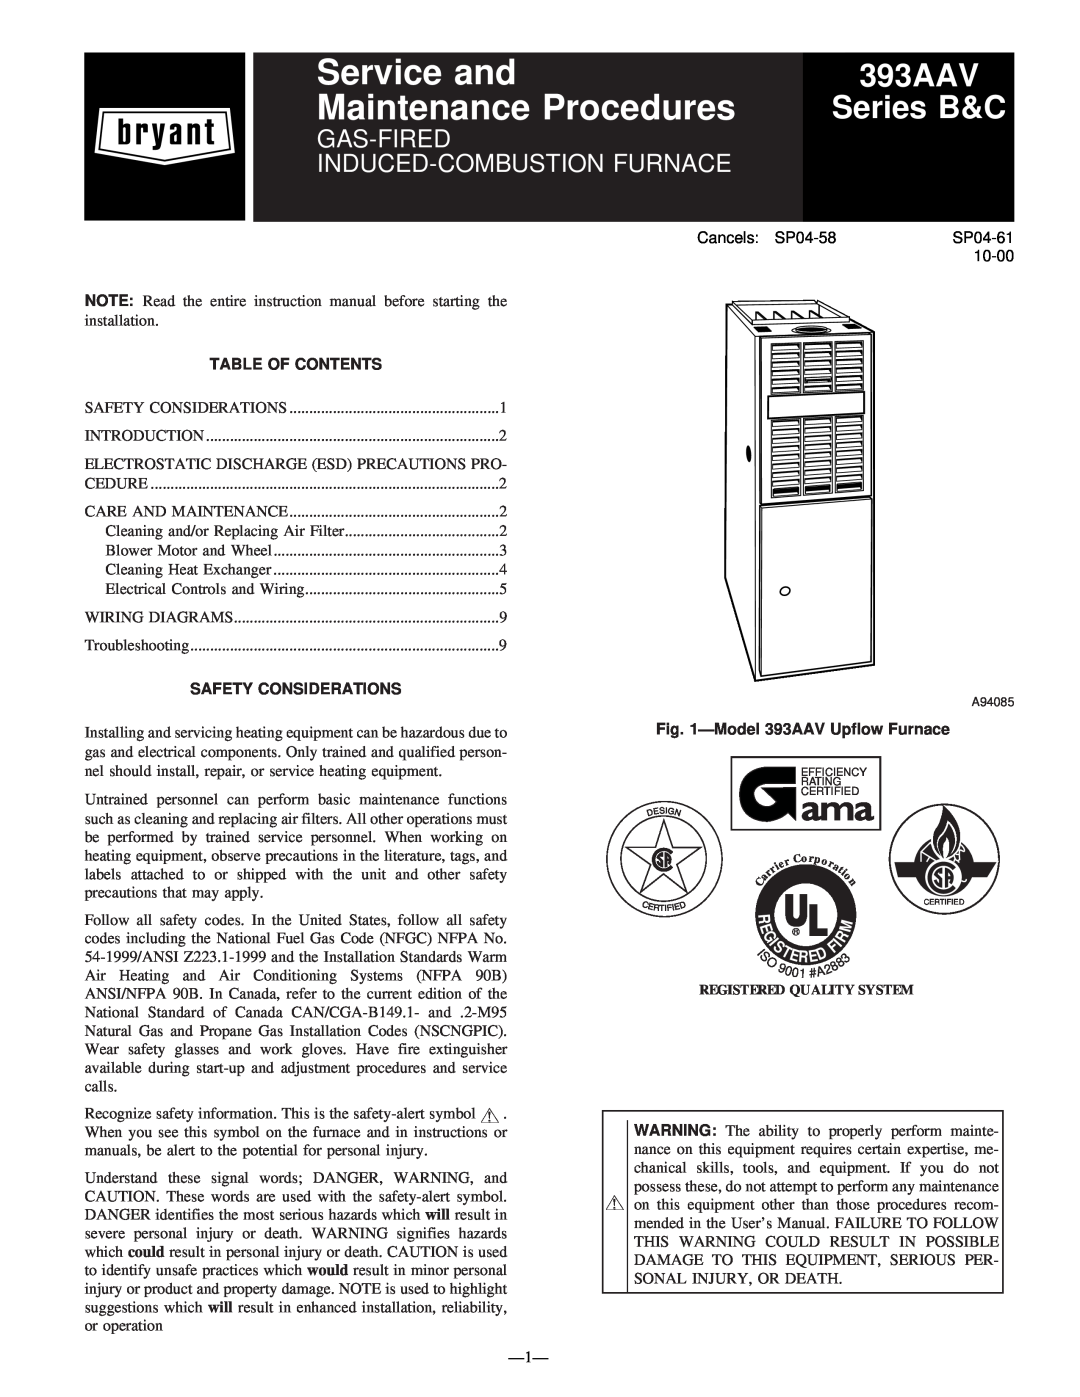 Bryant 393AAV instruction manual Service and, Maintenance Procedures, Series B&C, Gas-Fired Induced-Combustionfurnace 